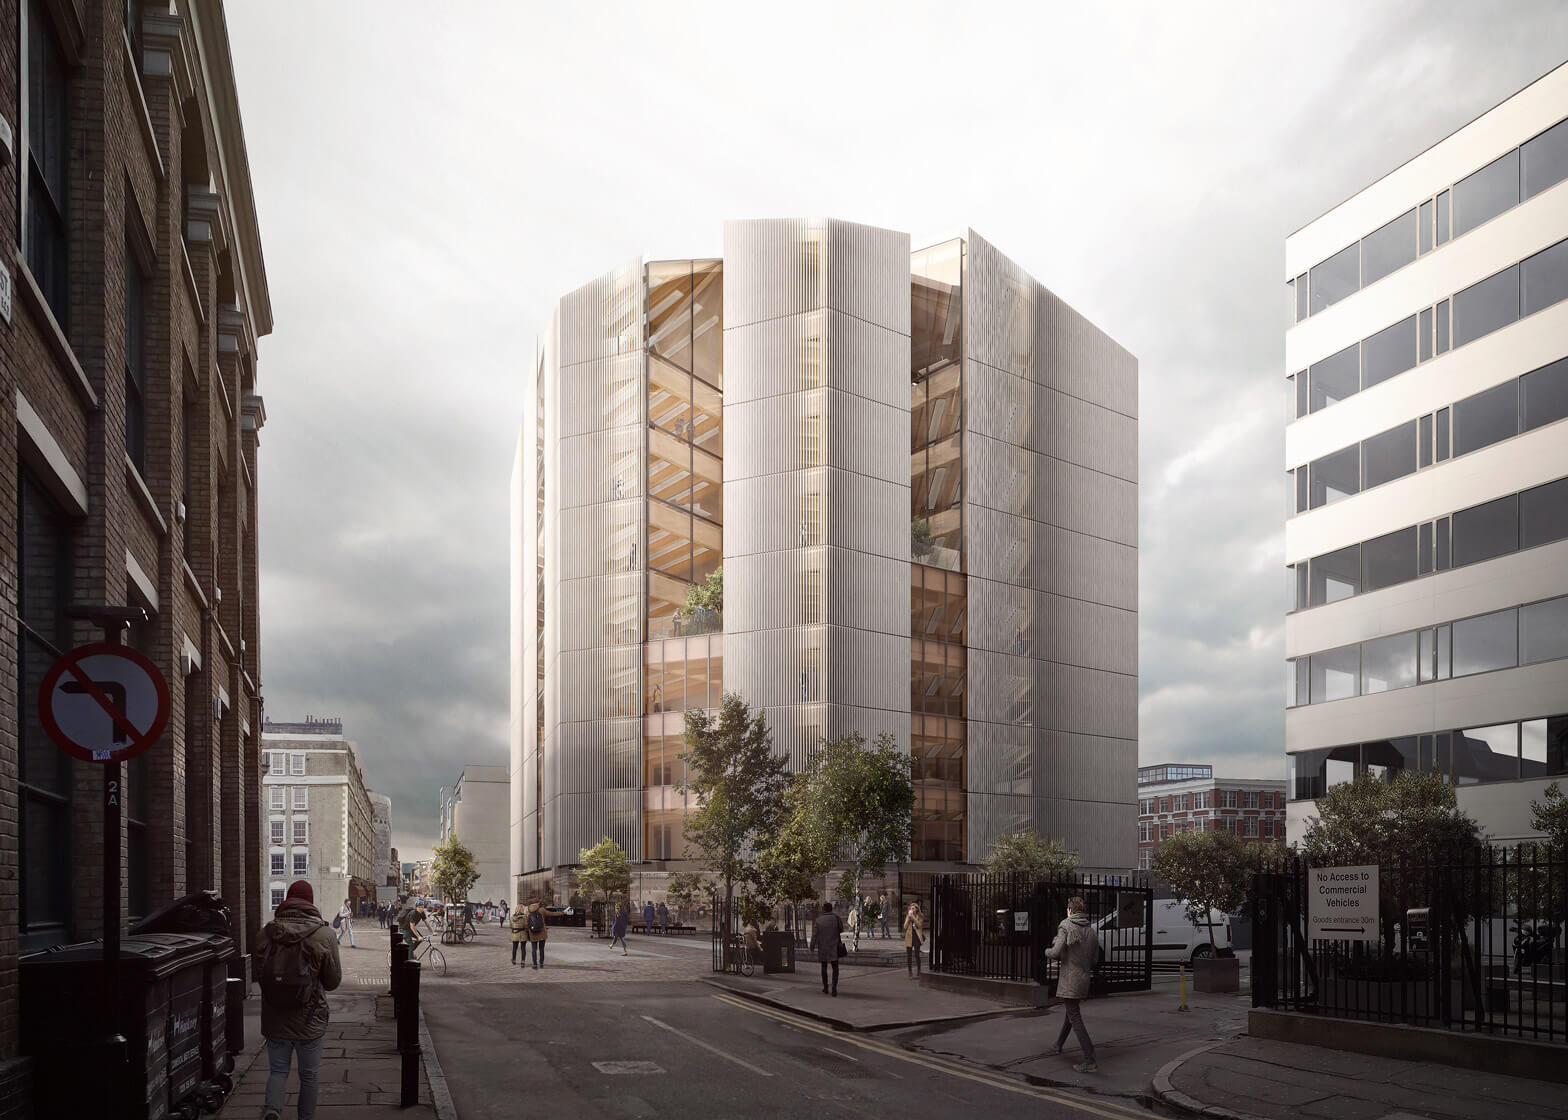 Office Architecture: Shoreditch Timber Structure